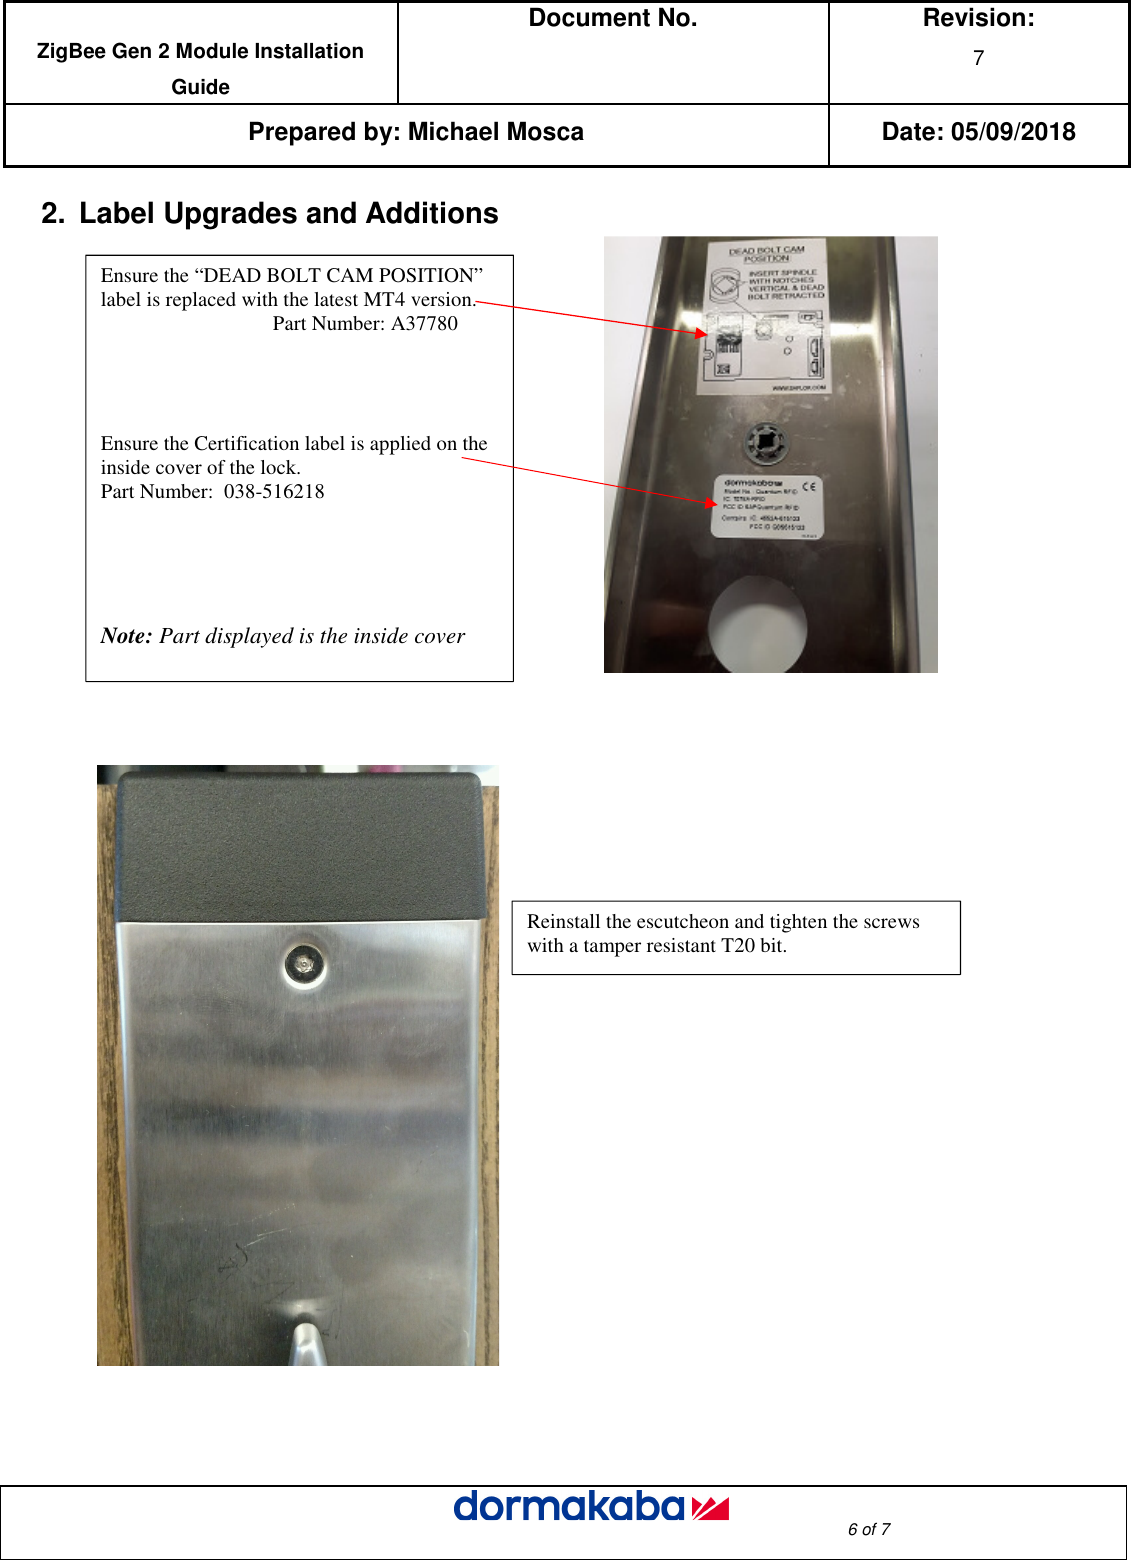  ZigBee Gen 2 Module Installation Guide Document No.  Revision: 7  Prepared by: Michael Mosca Date: 05/09/2018                                                                                                                                                                                                     6 of 7  2.  Label Upgrades and Additions                                   Reinstall the escutcheon and tighten the screws with a tamper resistant T20 bit. Ensure the “DEAD BOLT CAM POSITION” label is replaced with the latest MT4 version.                                    Part Number: A37780         Ensure the Certification label is applied on the inside cover of the lock.  Part Number:  038-516218                                         Note: Part displayed is the inside cover   